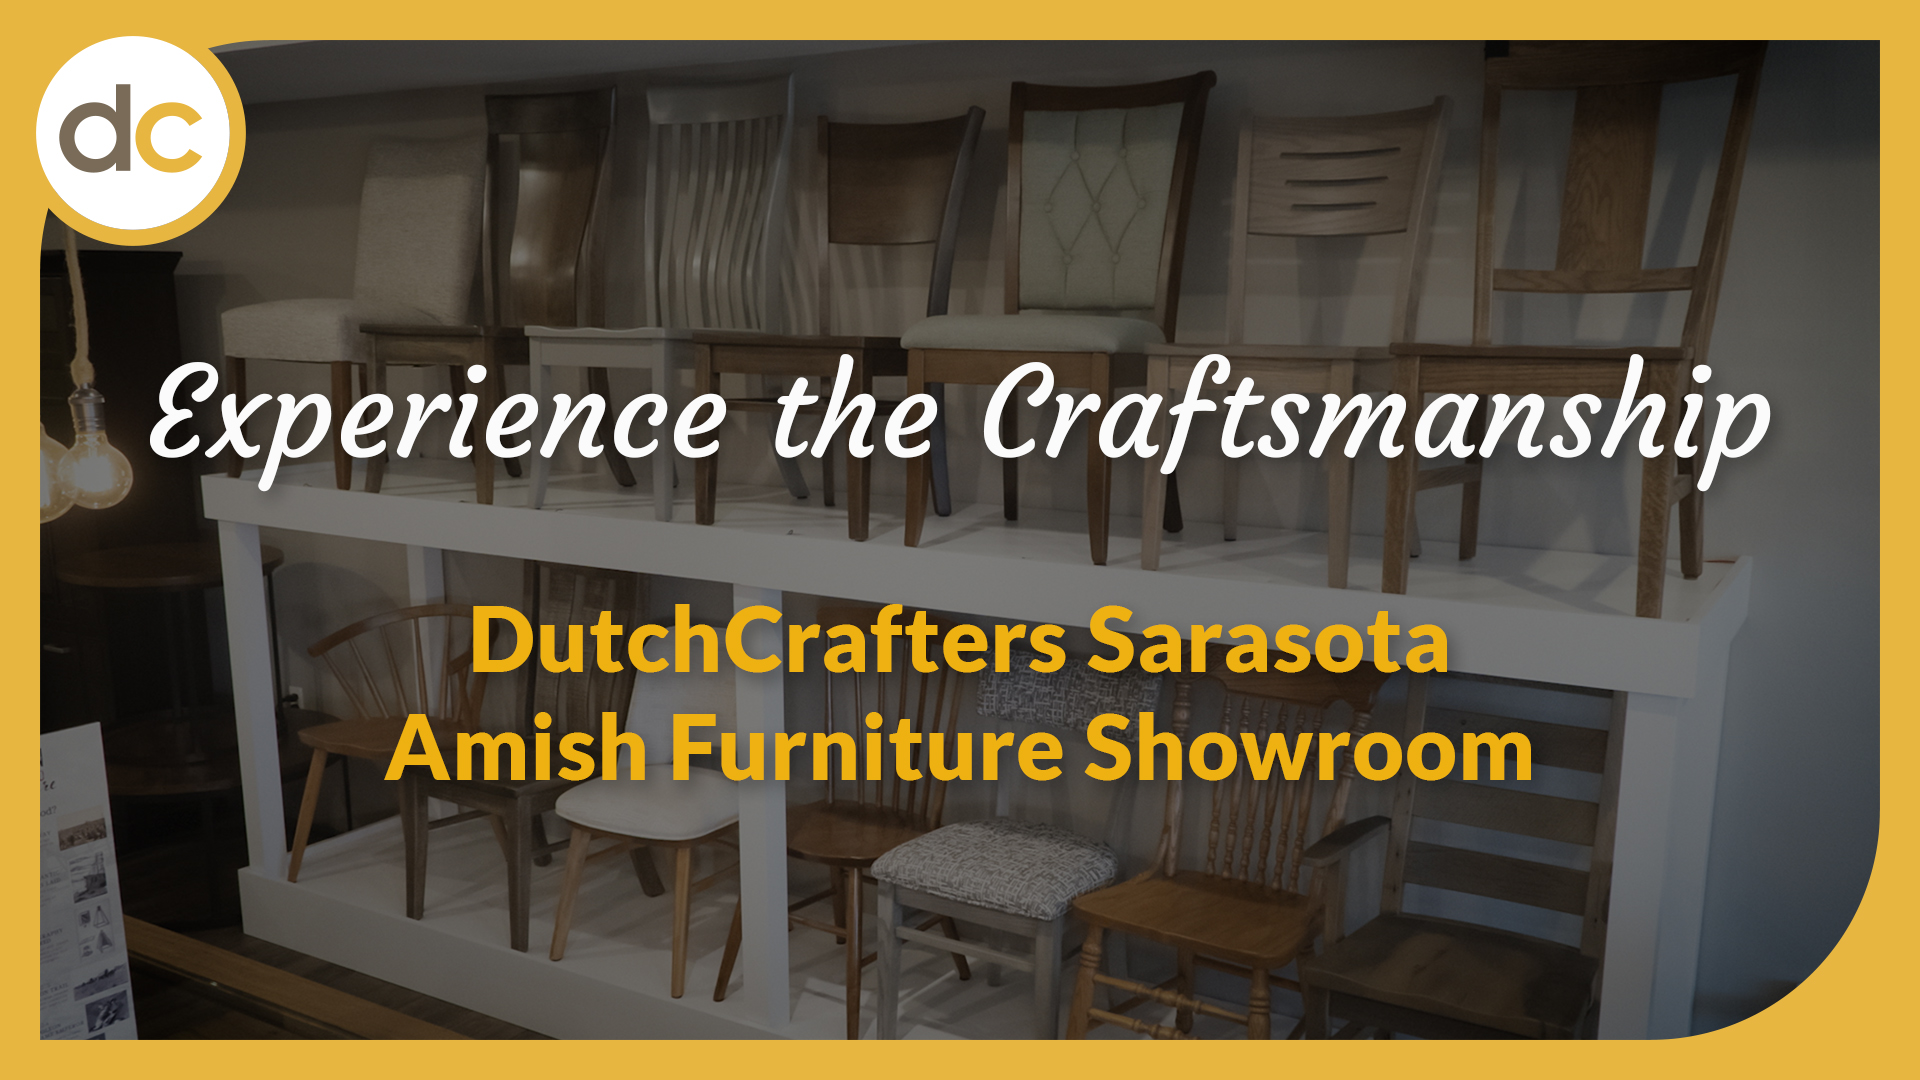 Experience the Craftsmanship at DutchCrafters Sarasota Amish Furniture Showroom, displayed as text over a image of a dining chair display